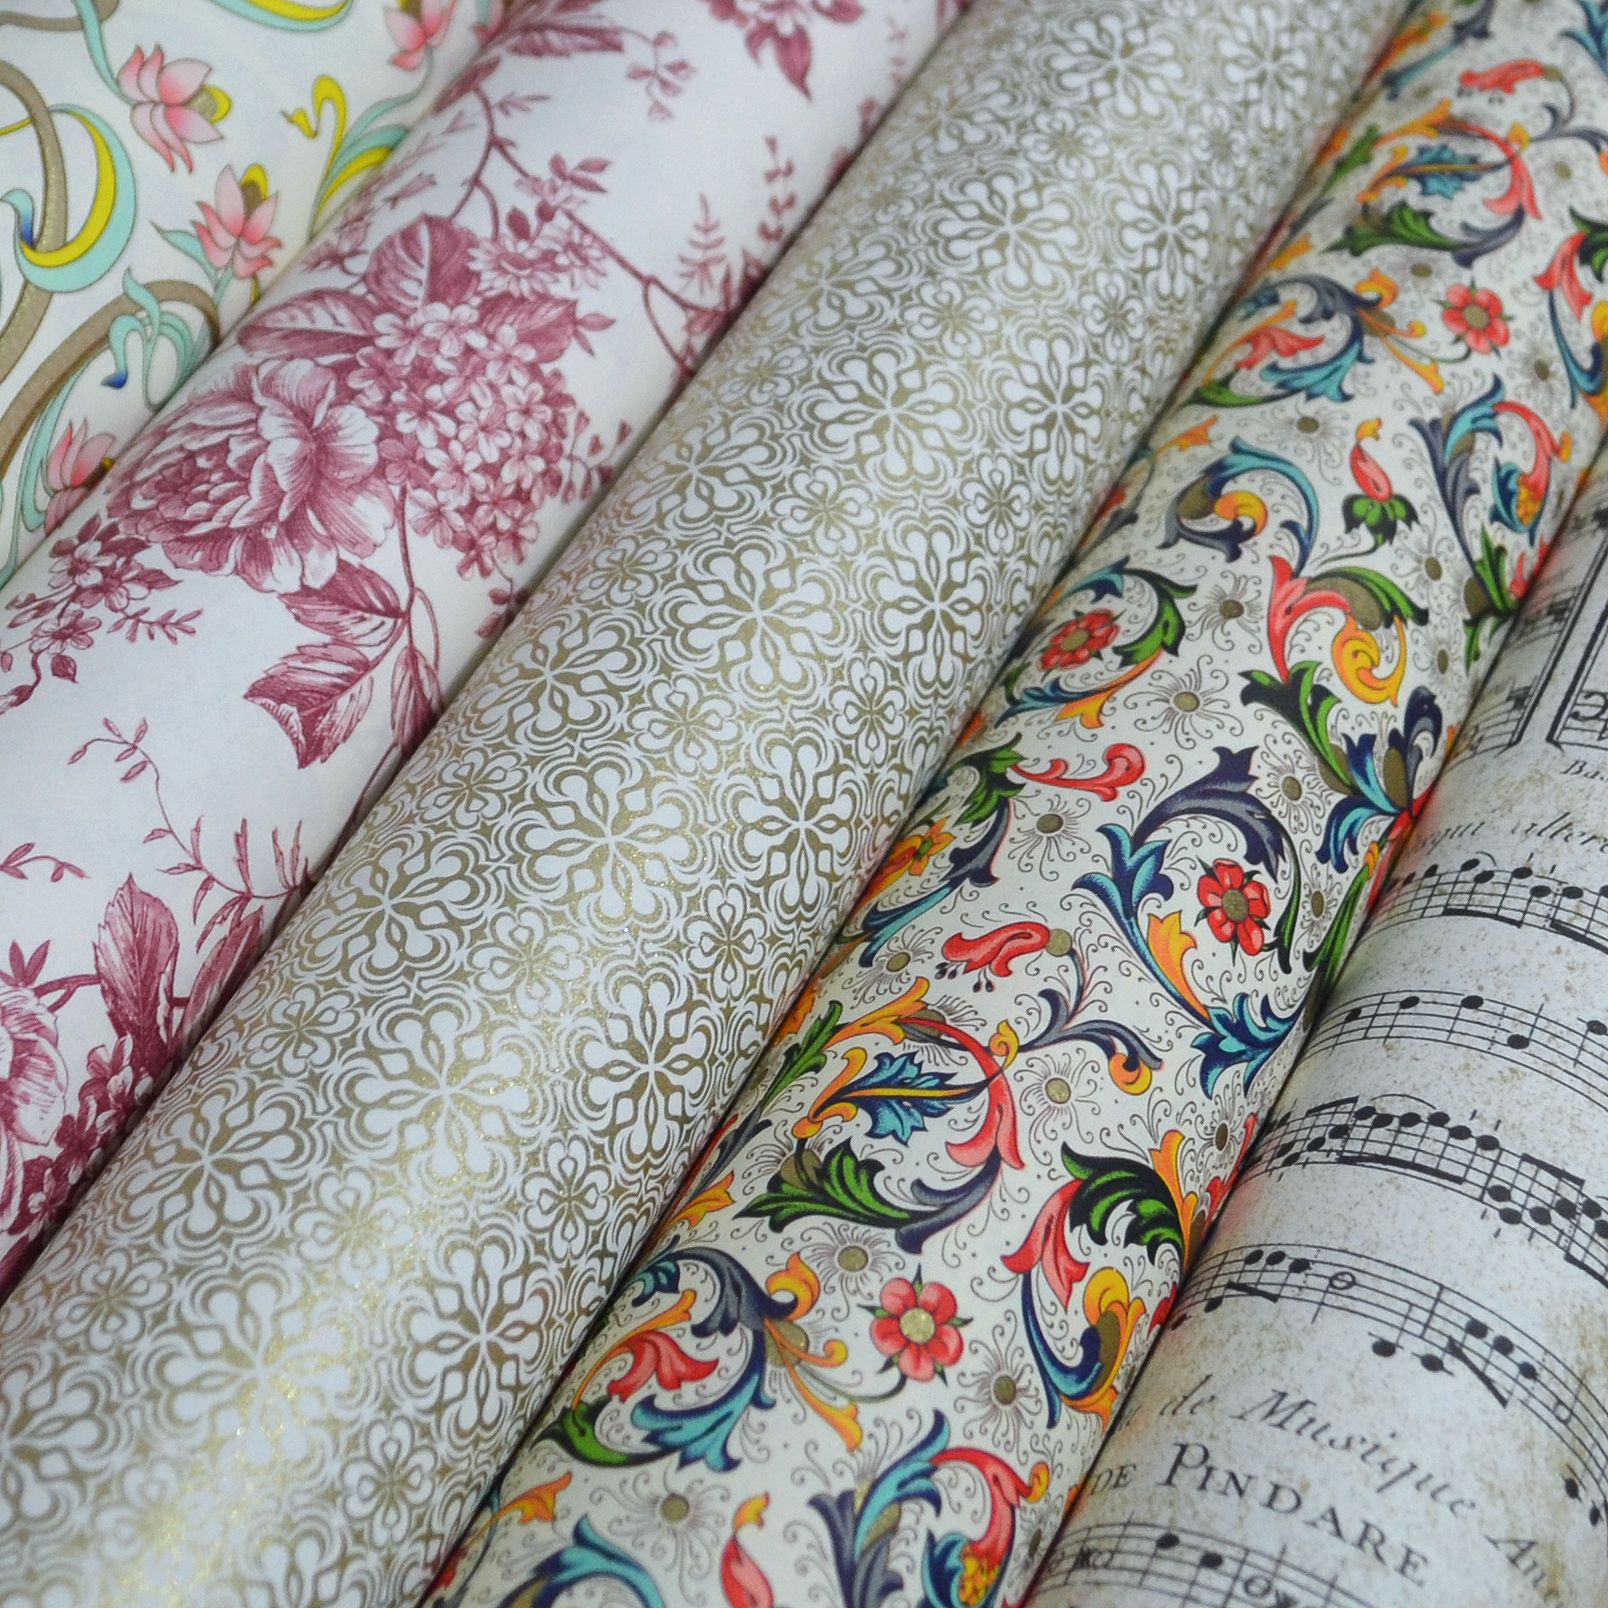 Selection of Decorative Papers